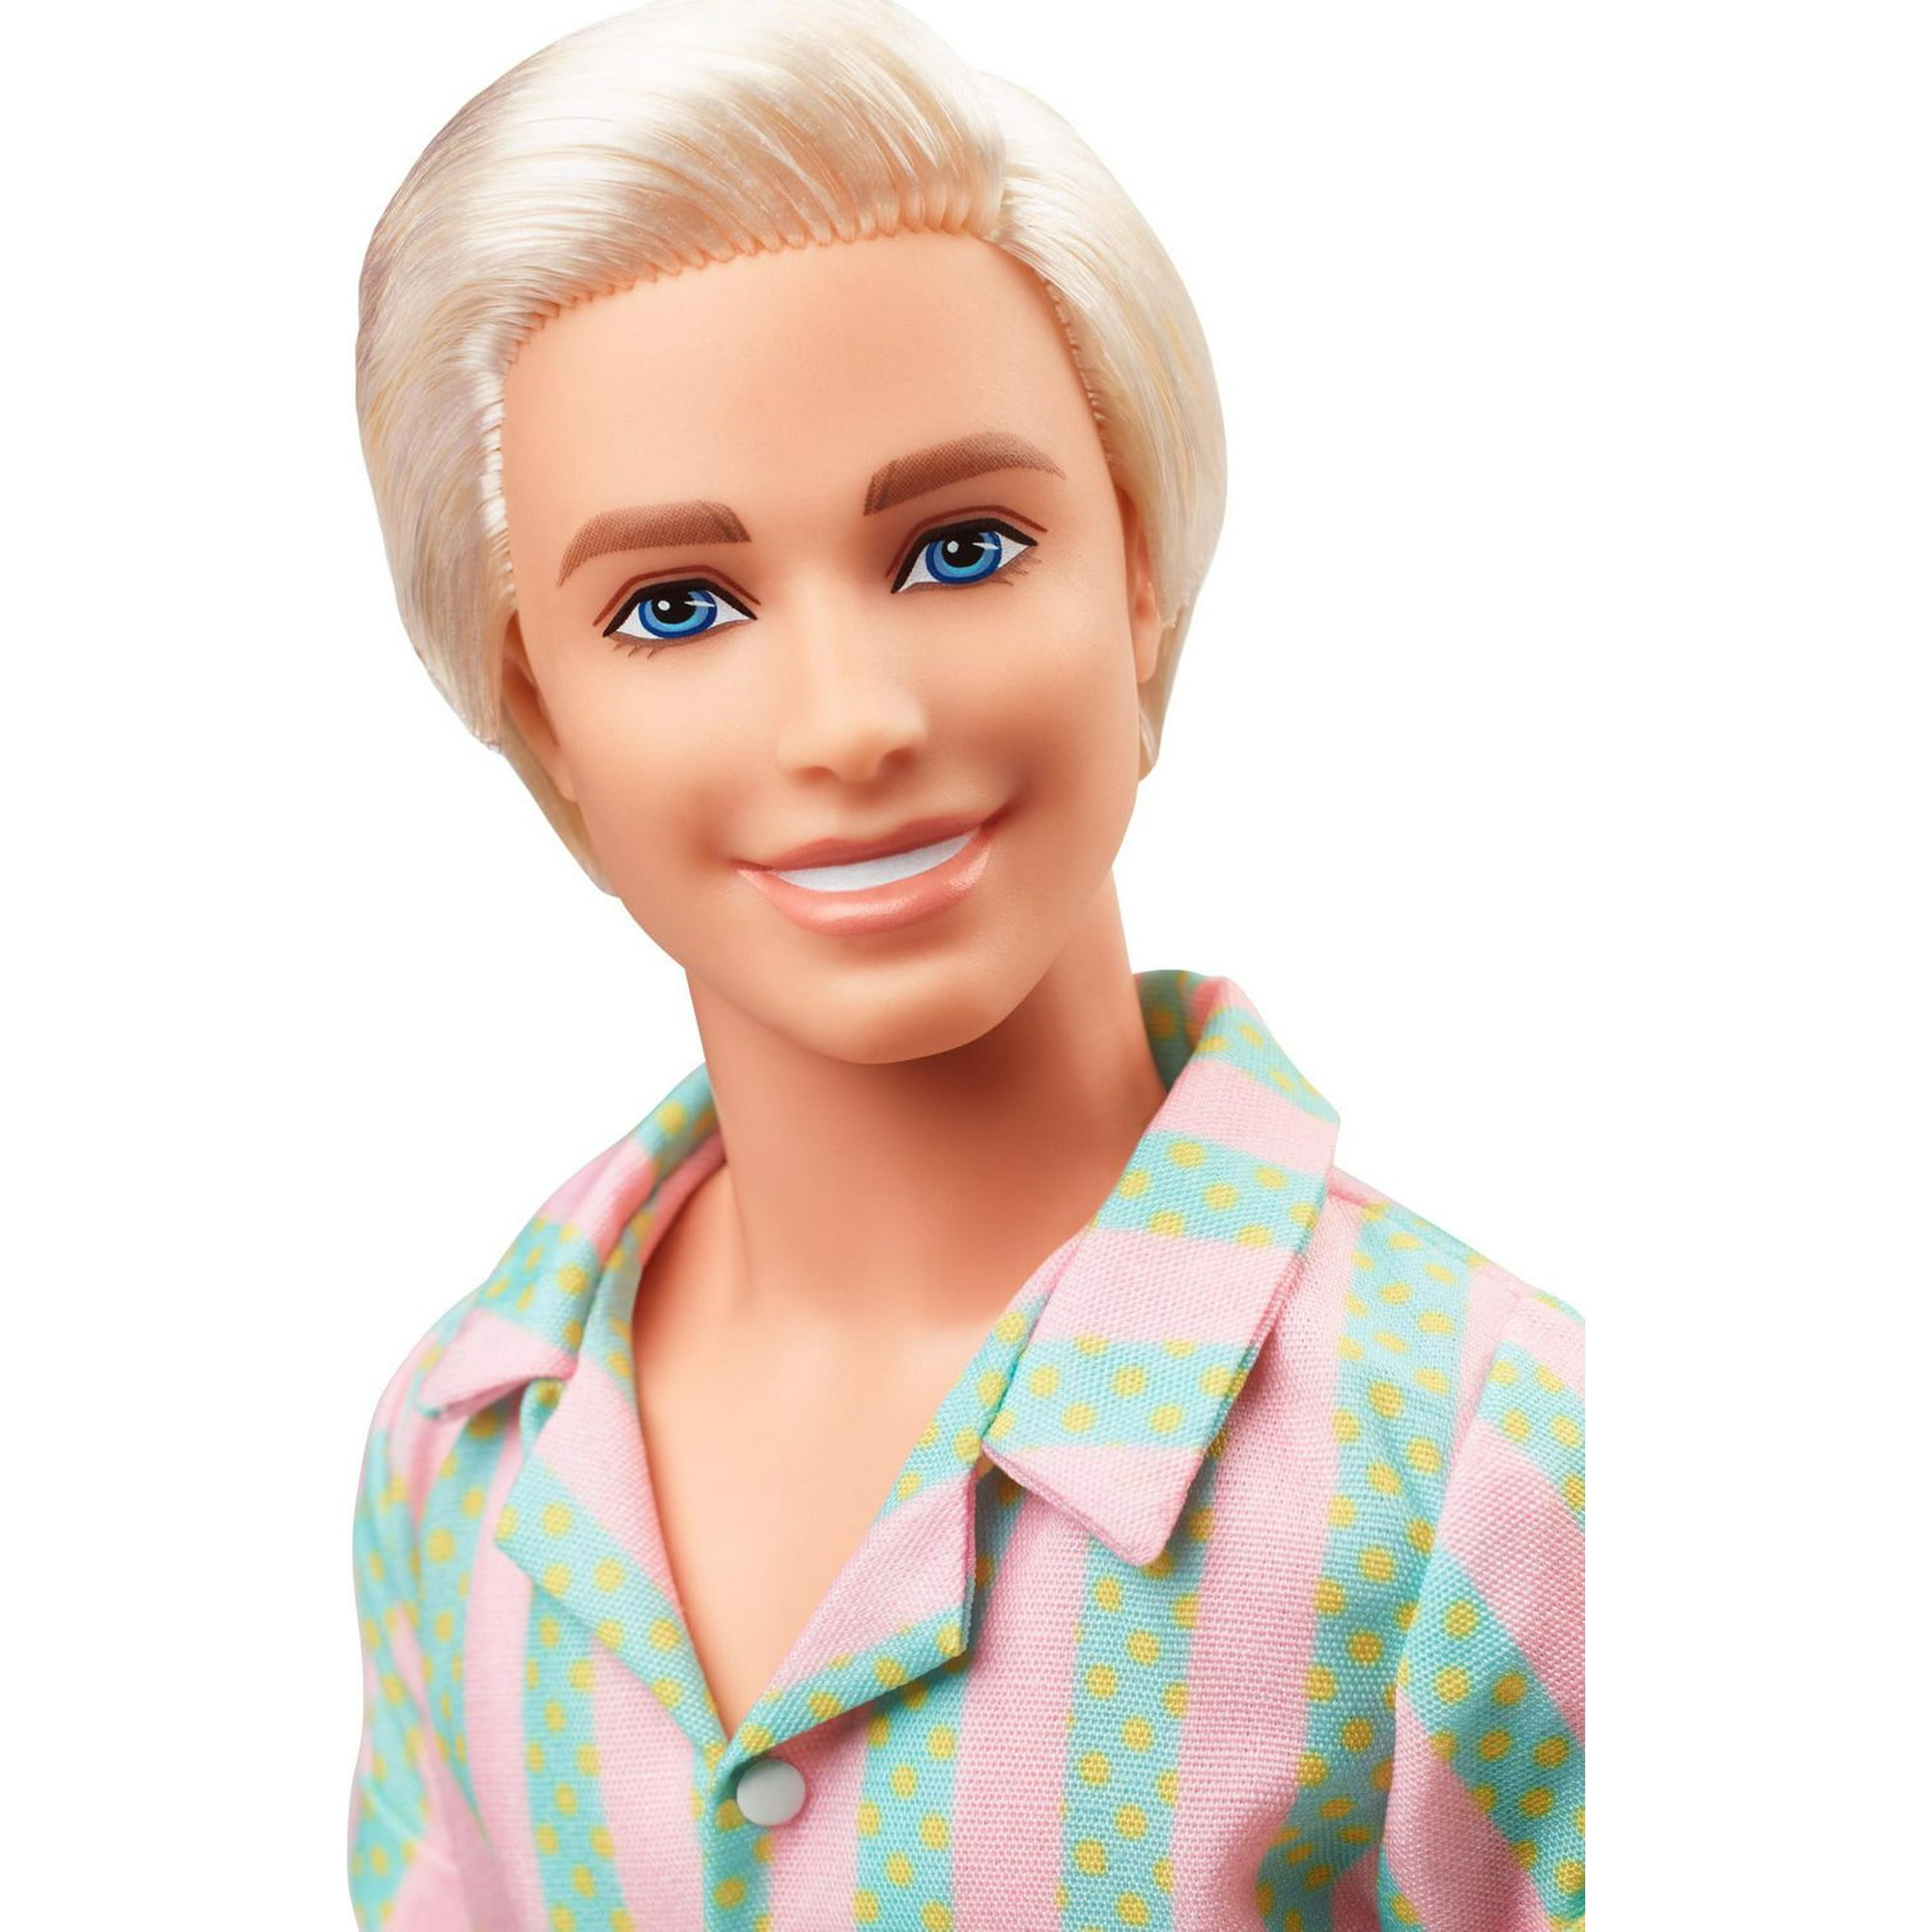 Barbie and Ken Dolls, 2-Pack Featuring Blonde Hair and Colorful